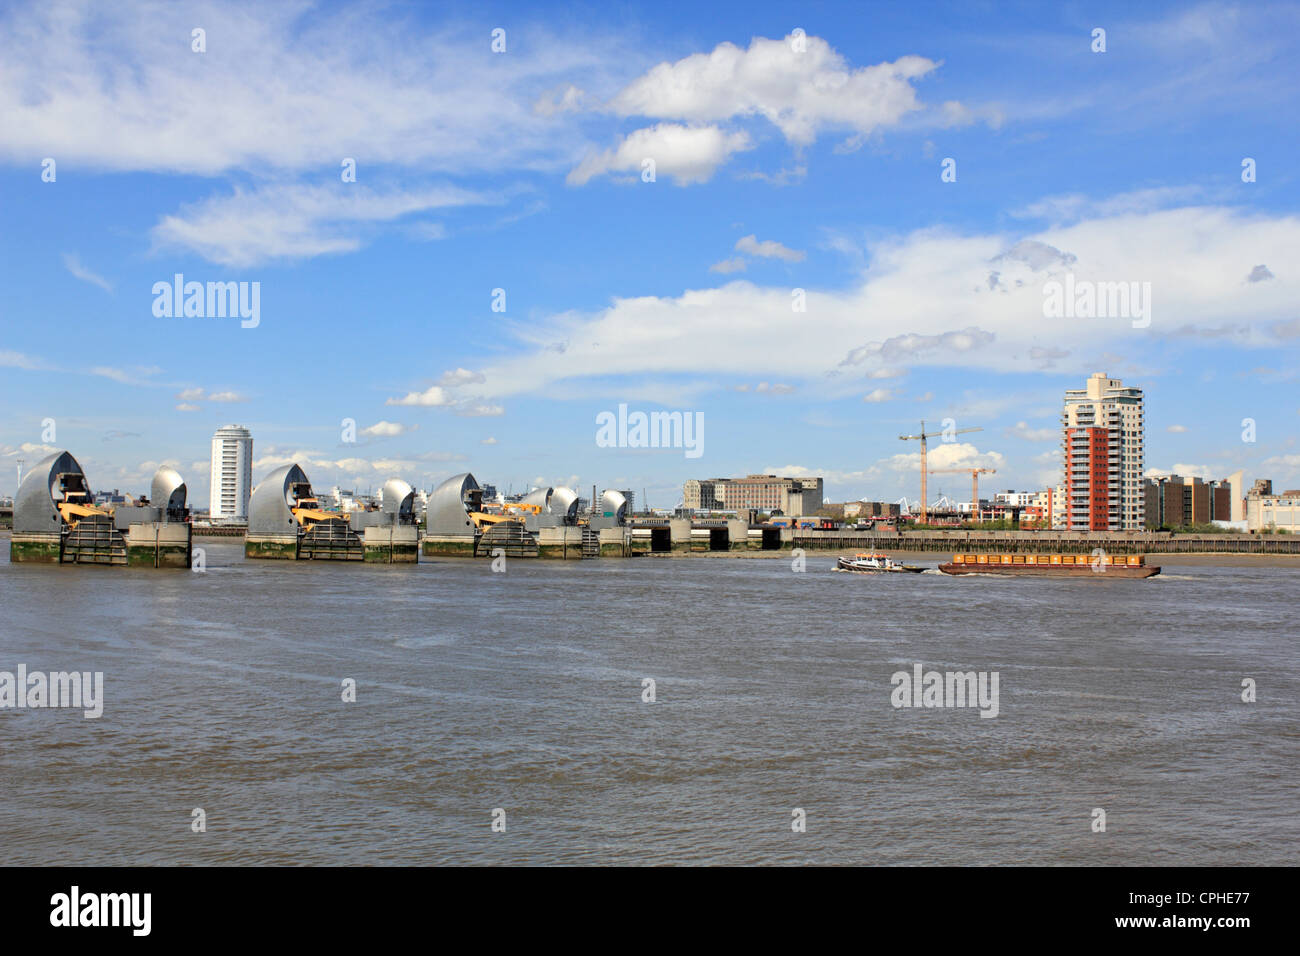 Thames Barrier London Boat Stock Photos & Thames Barrier London Boat ...